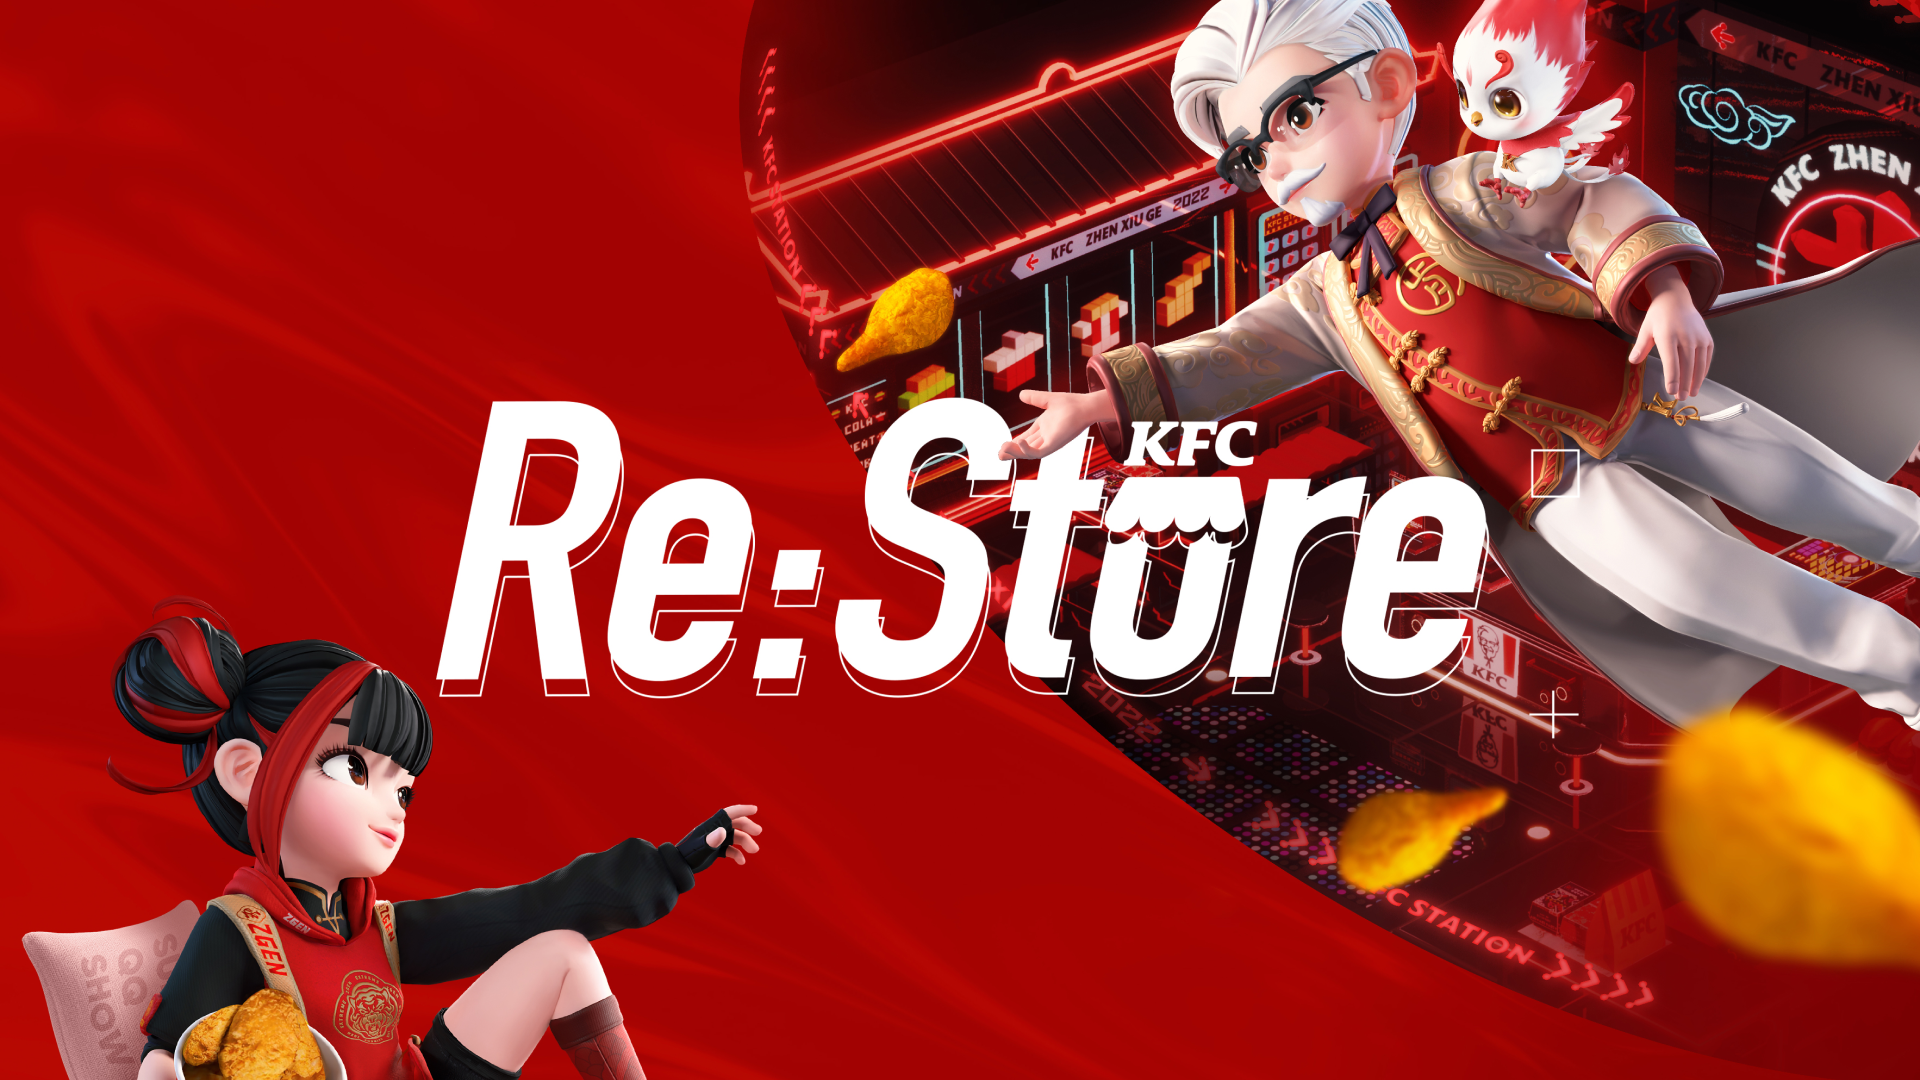 KFC Re:Store VR Campaign Cover Image